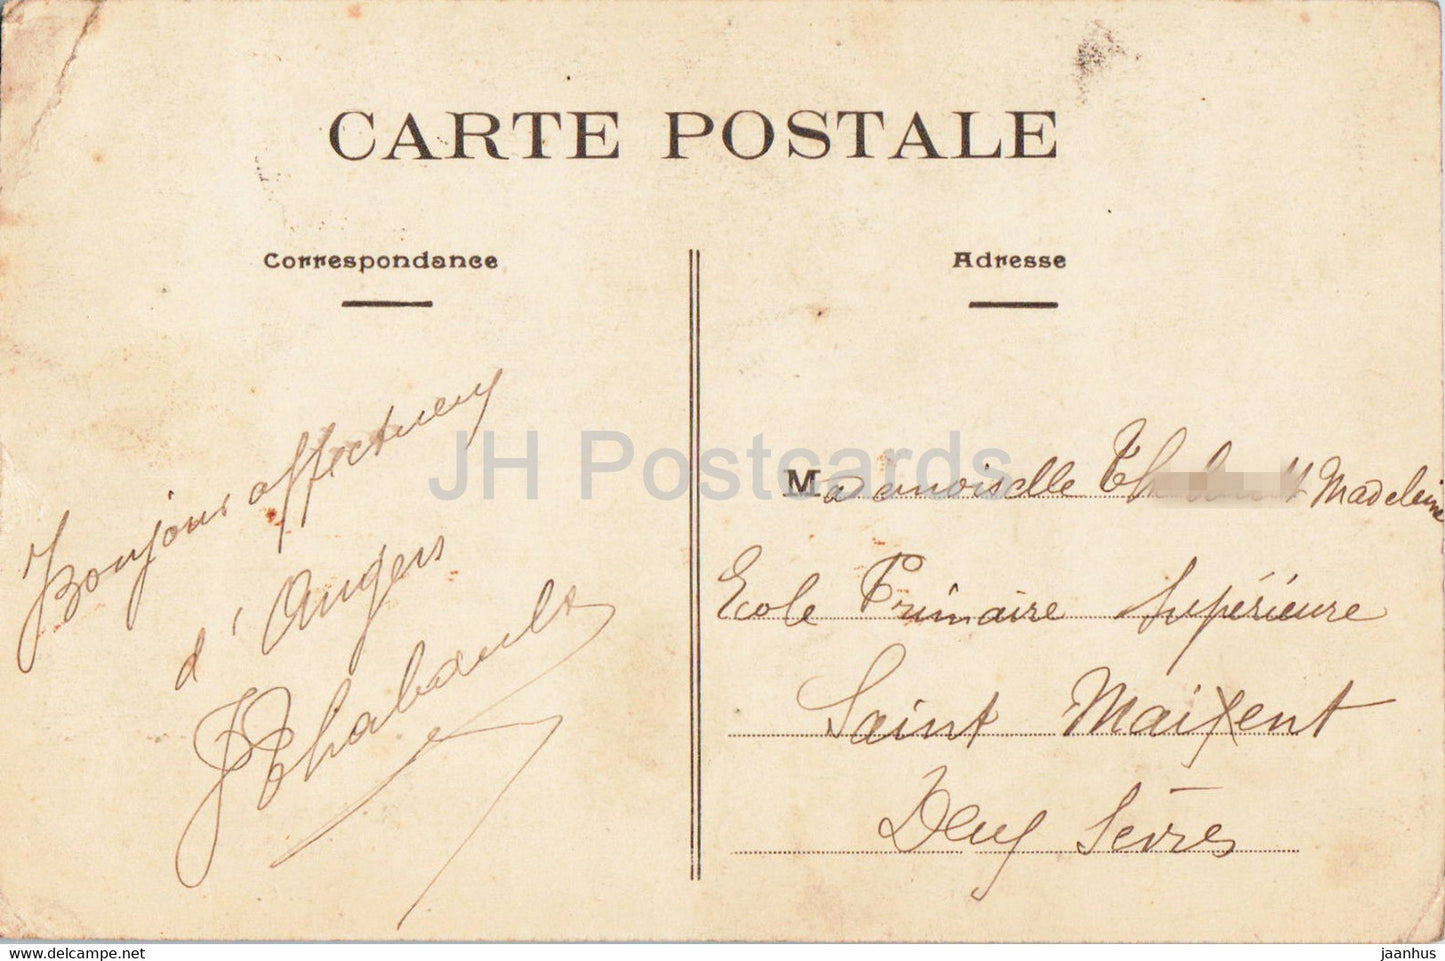 Angers - Musee - Galerie David - museum - 44 - old postcard - 1909 - France - used